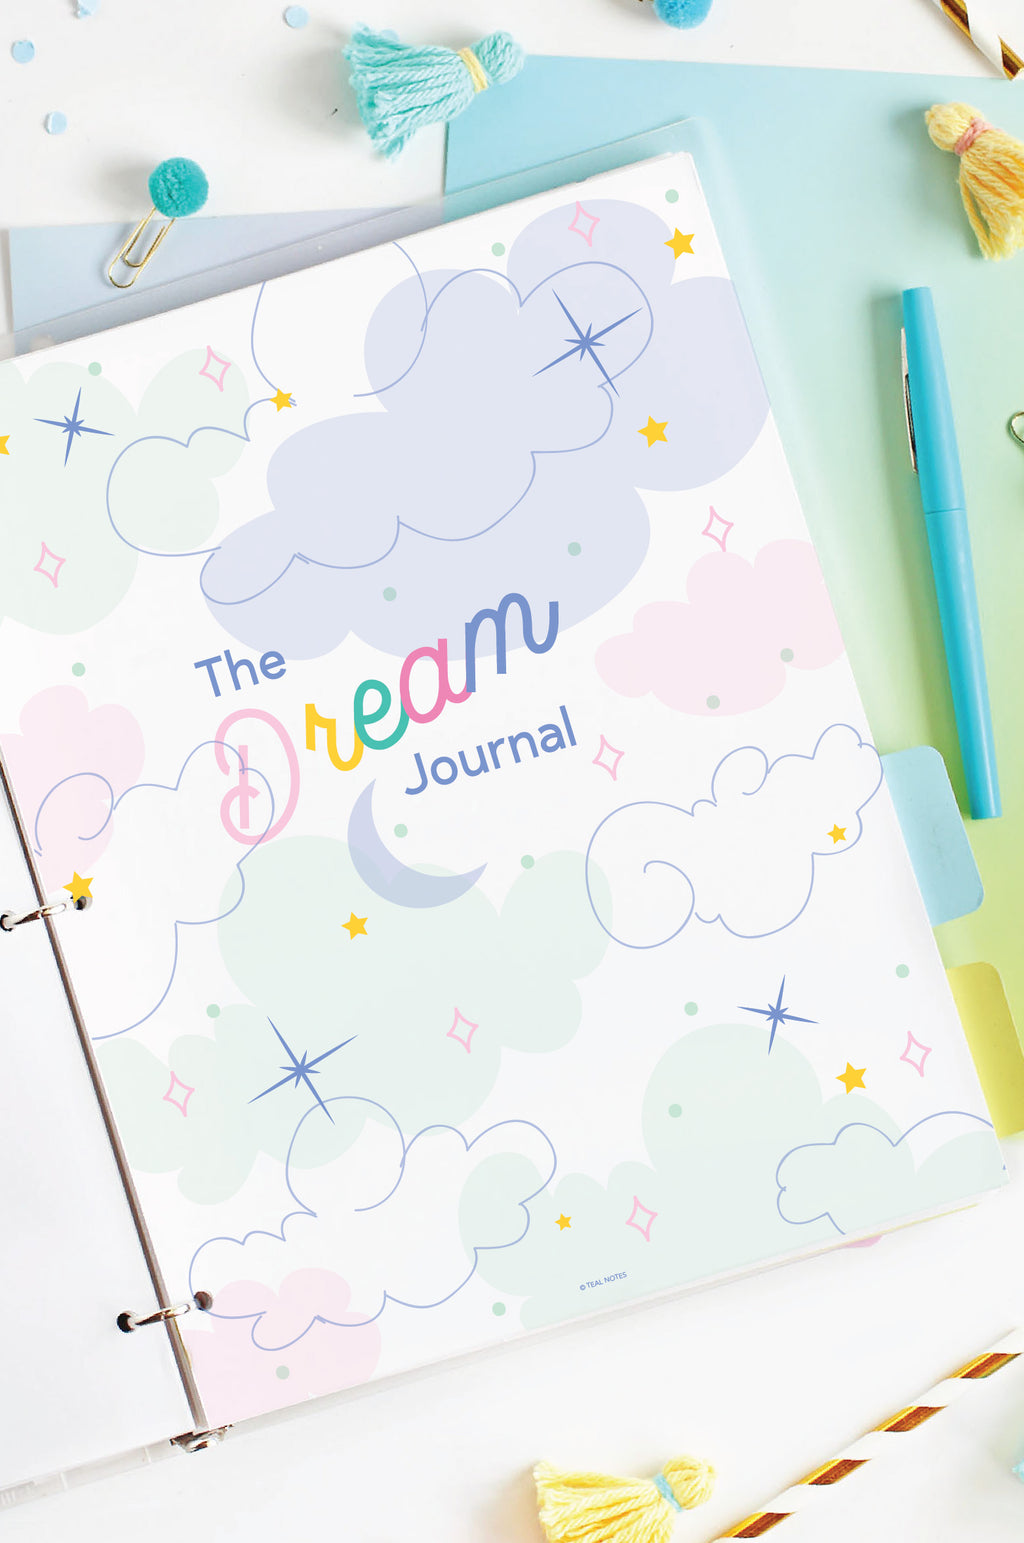 printable dream journal to record your dreams